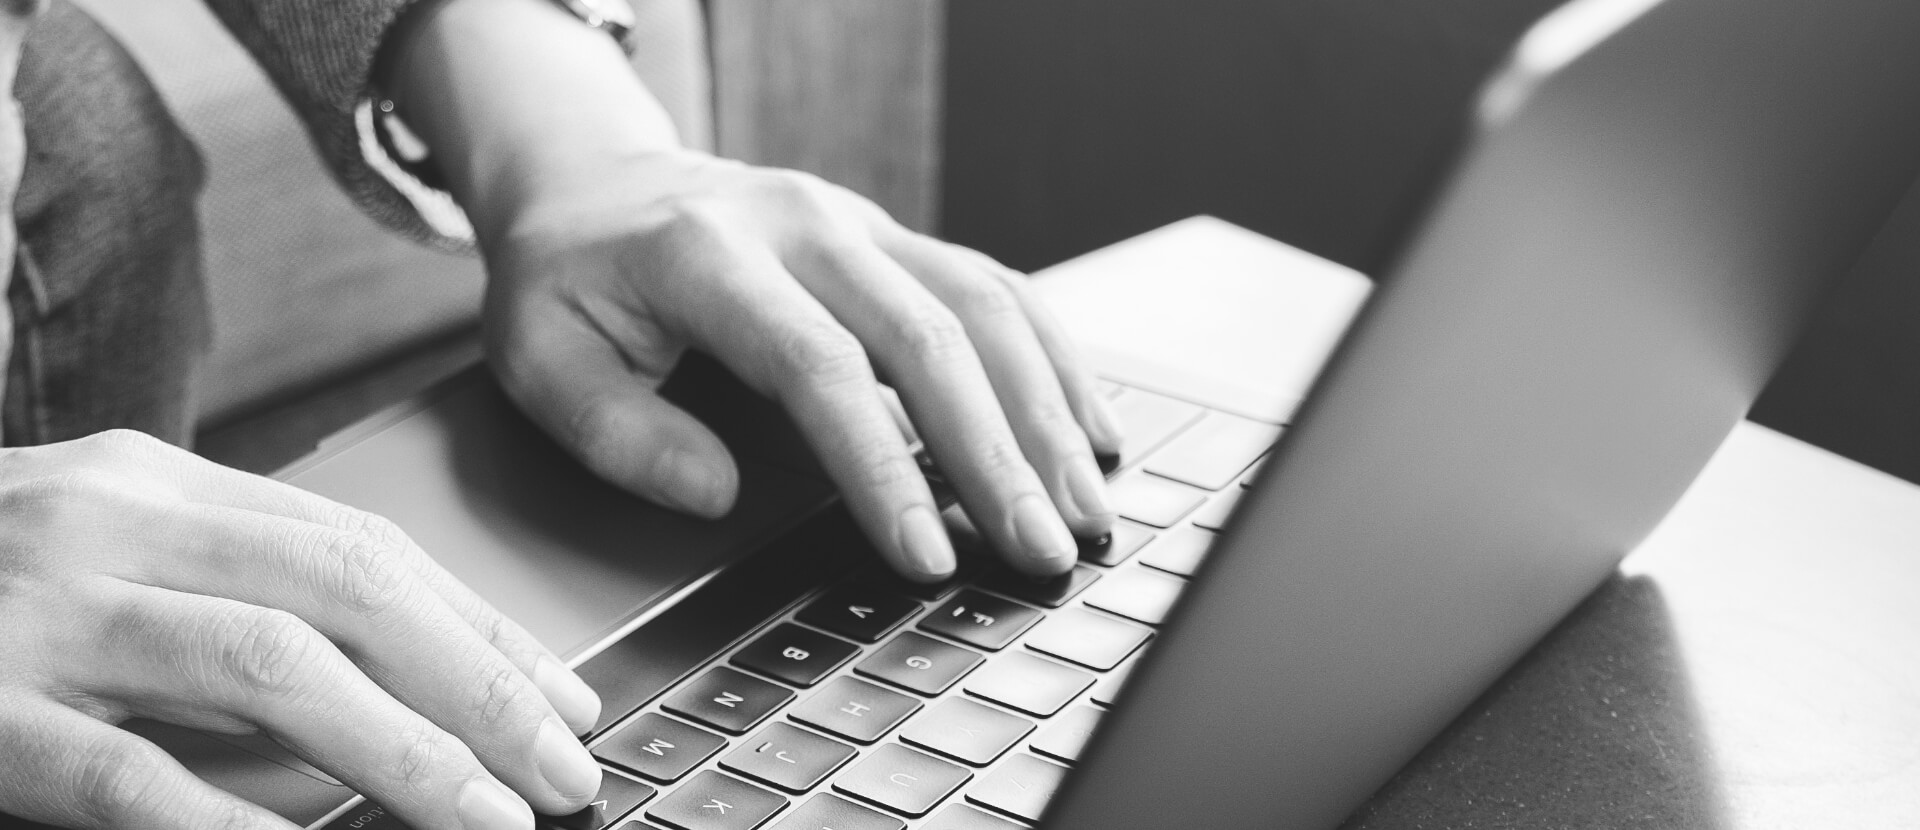 Close up of man's hands typing on a laptop, in black and white